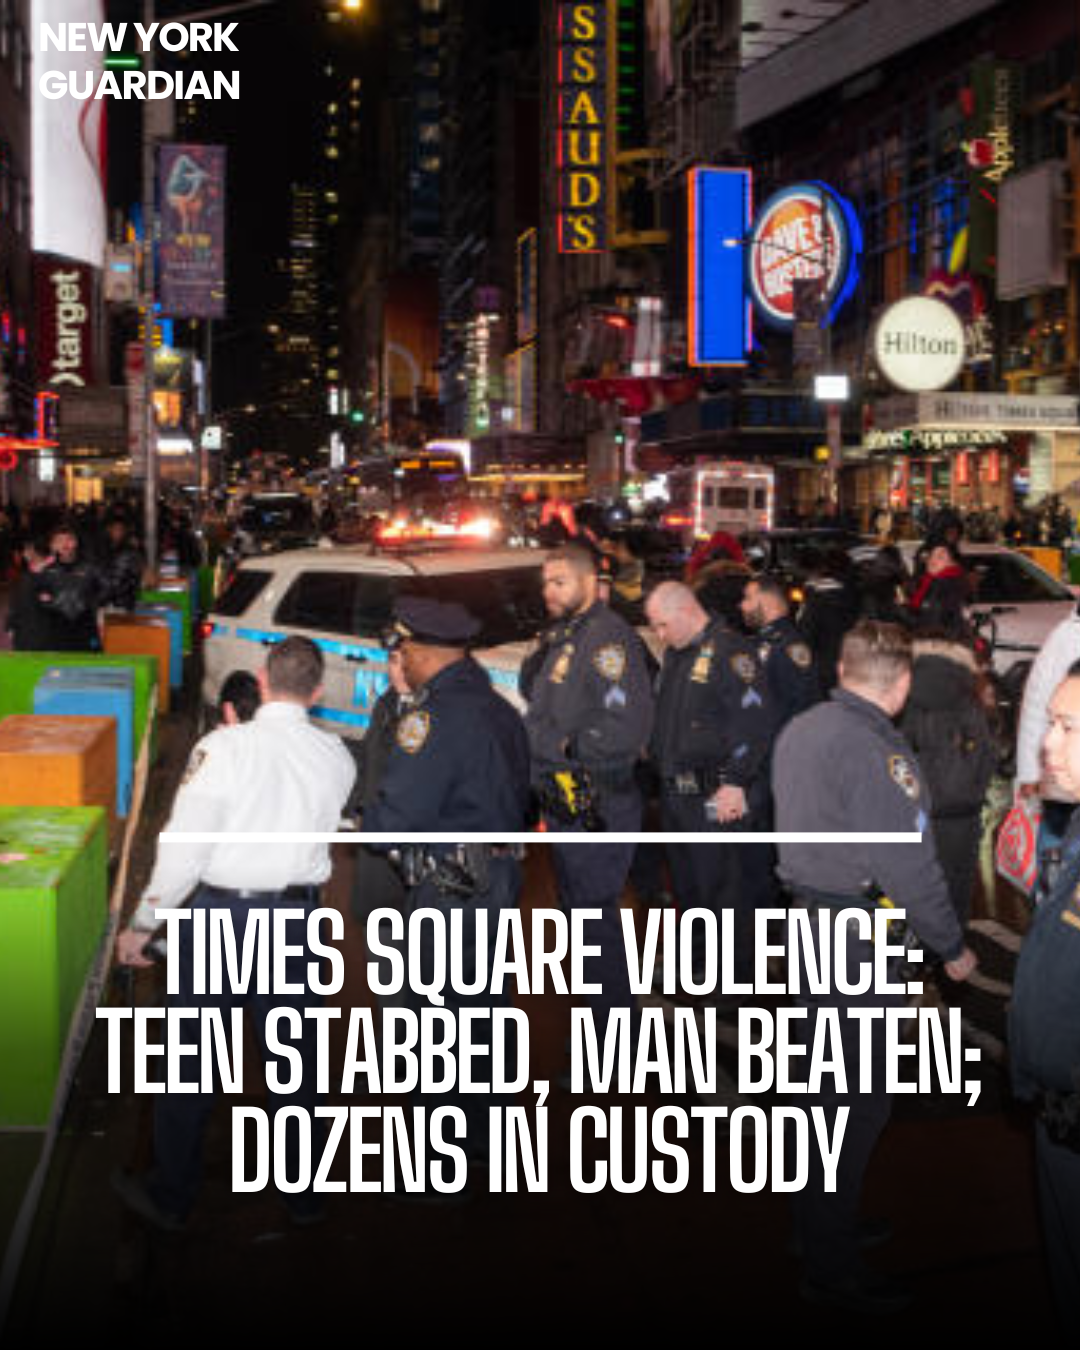 Multiple violent occurrences have shaken Times Square, with a youngster slashed and a guy battered.